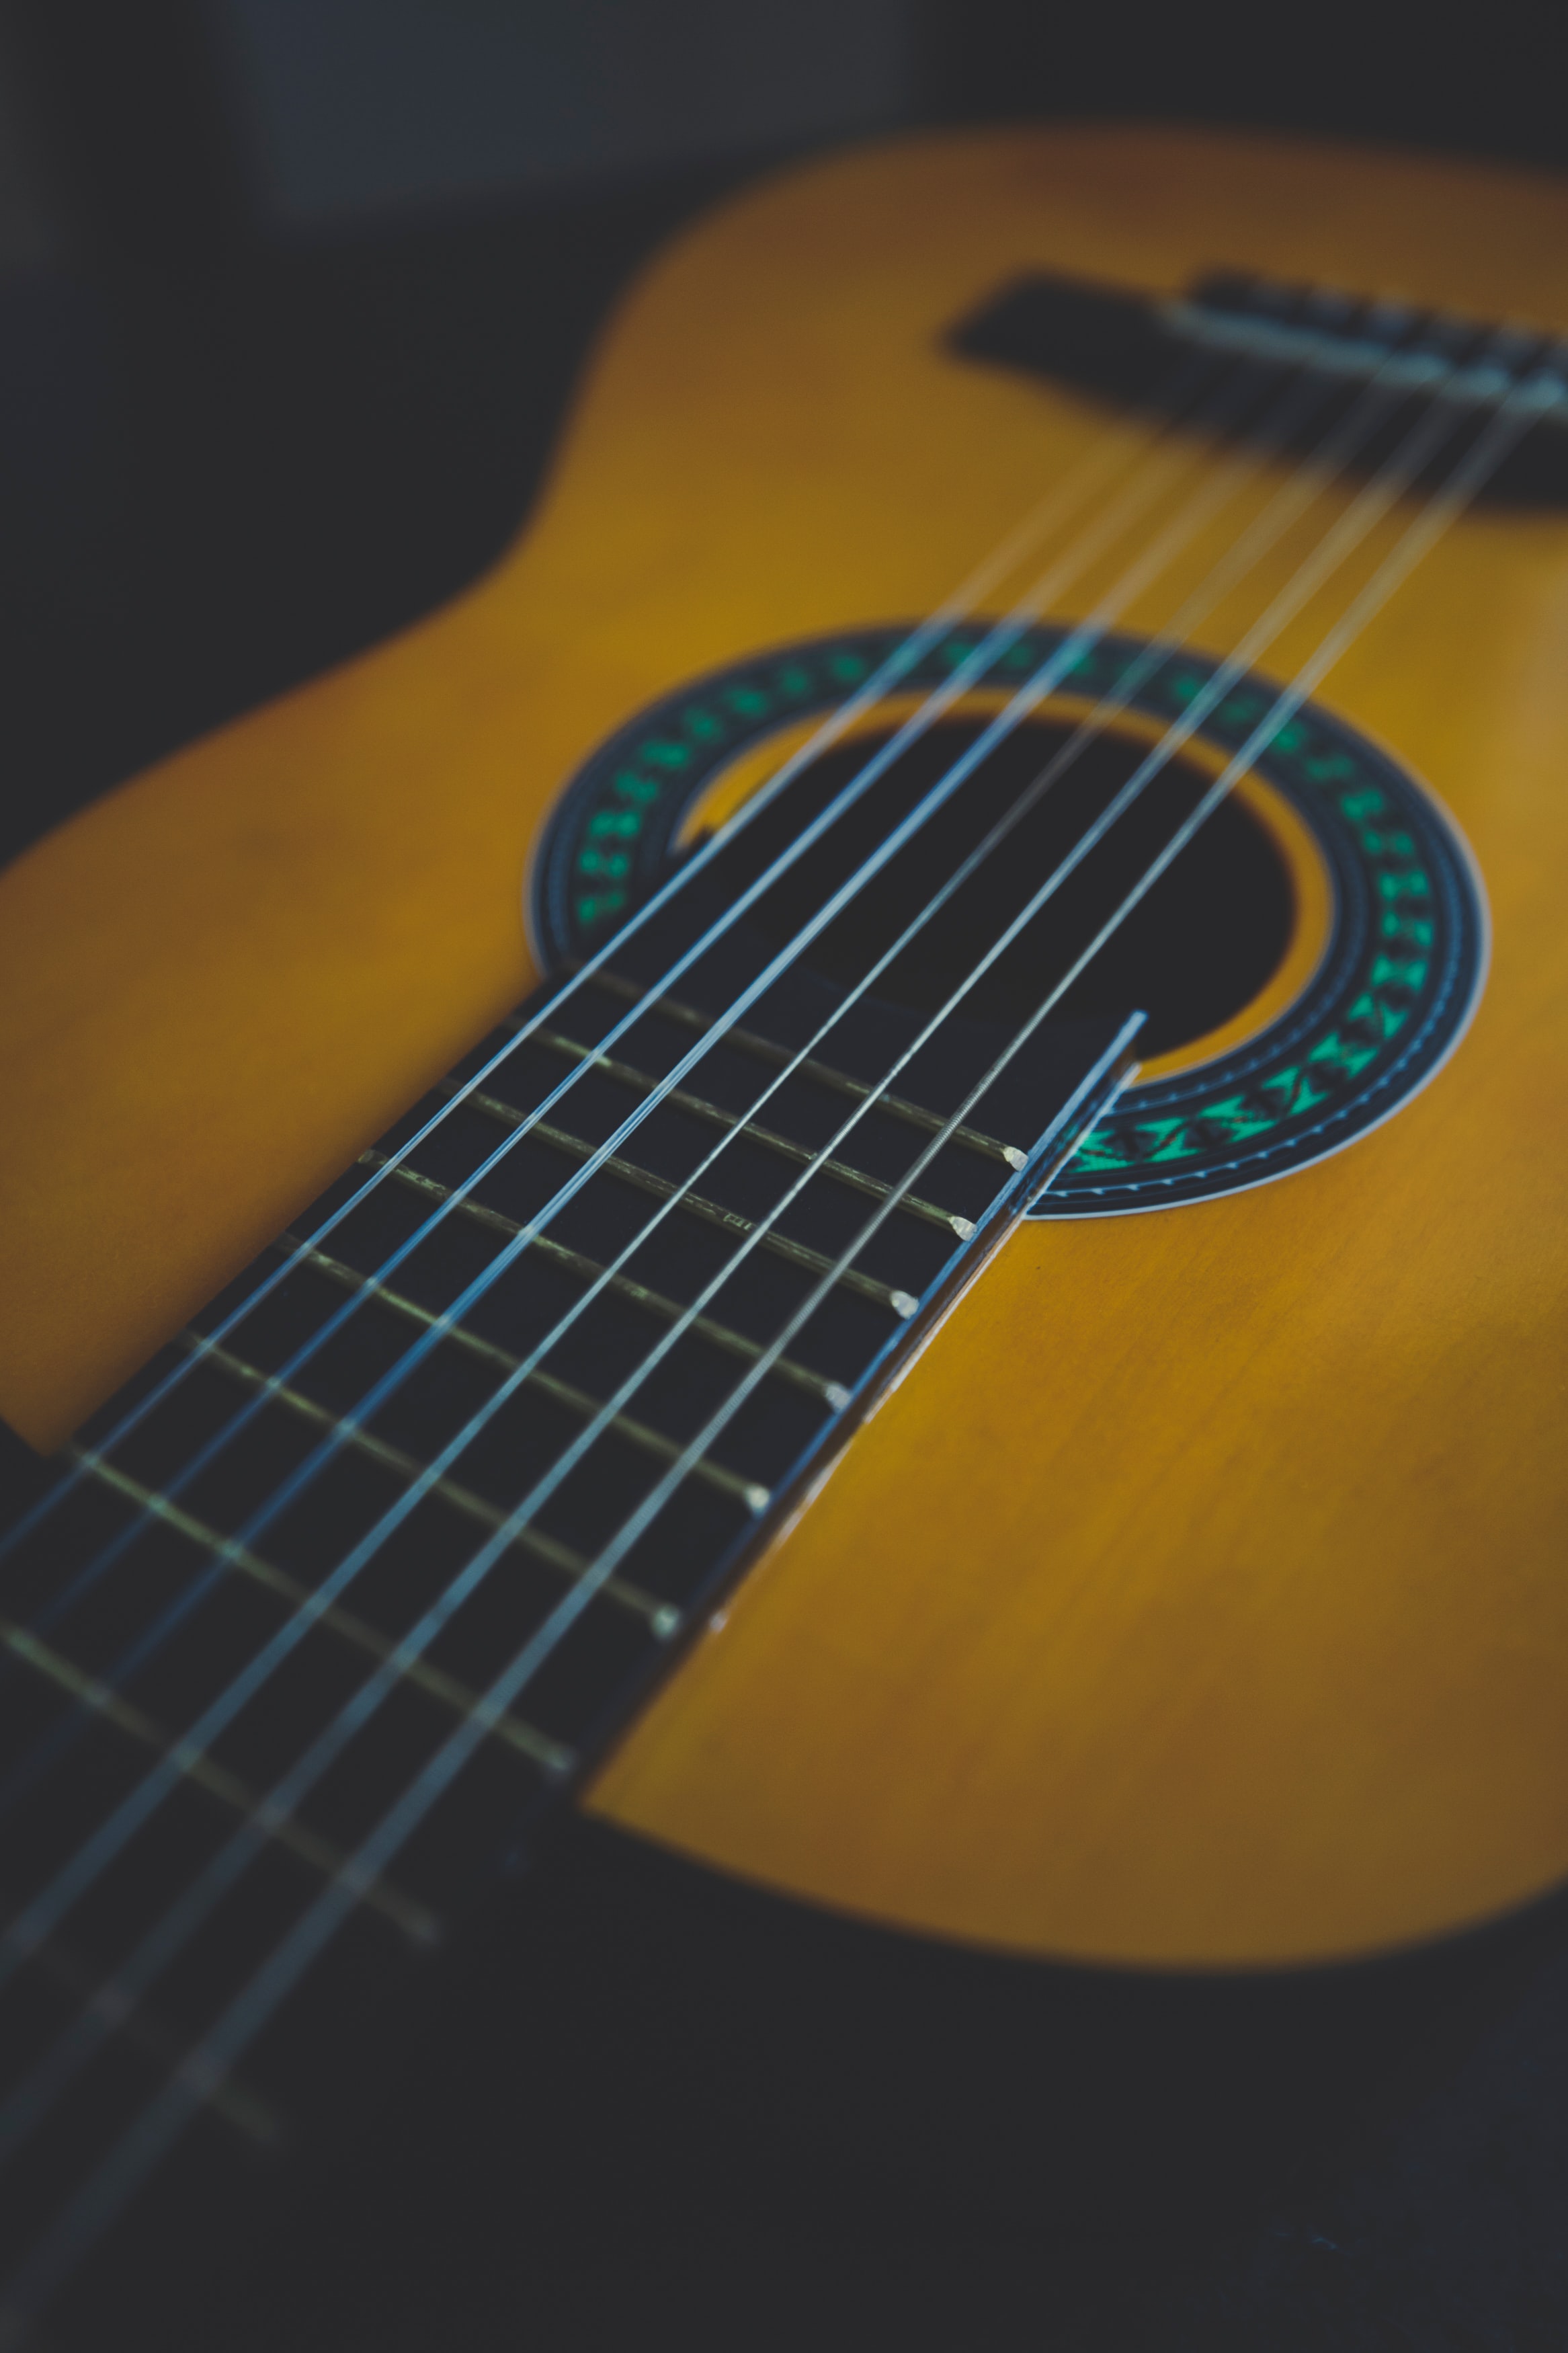 Phone Background Full HD musical instrument, acoustic guitar, guitar, music